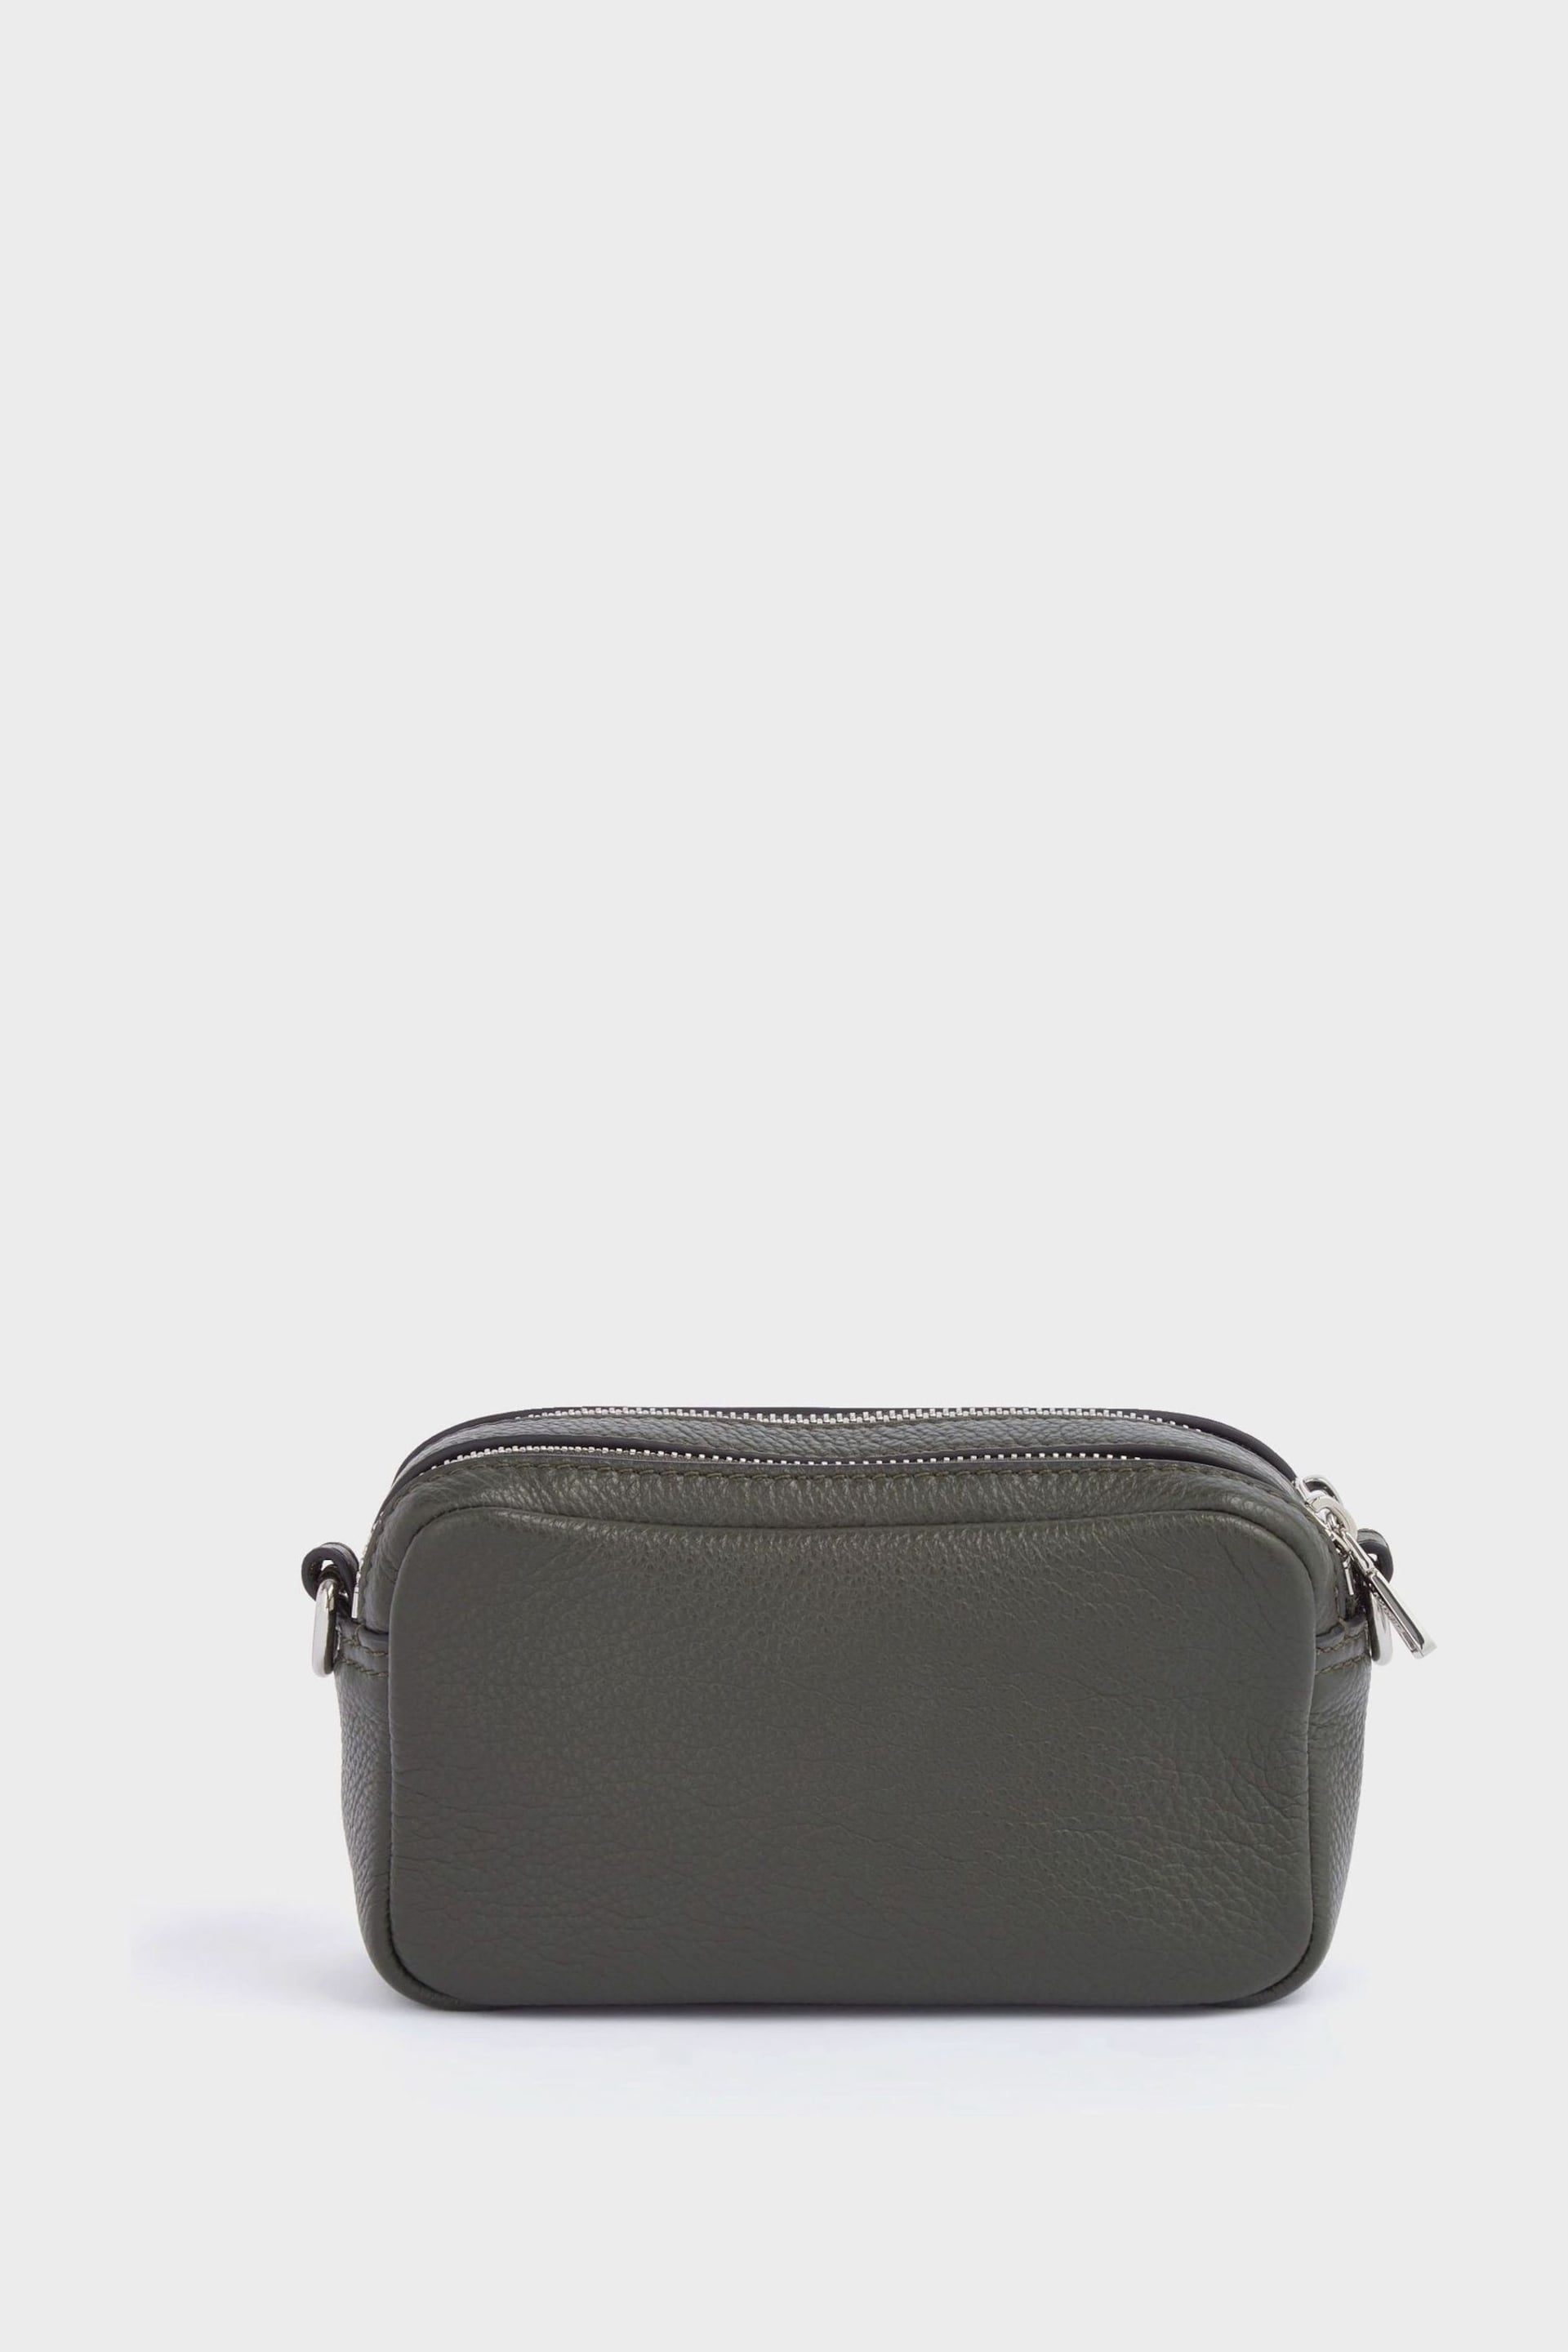 OSPREY LONDON Chester Leather Cross-Body - Image 3 of 7